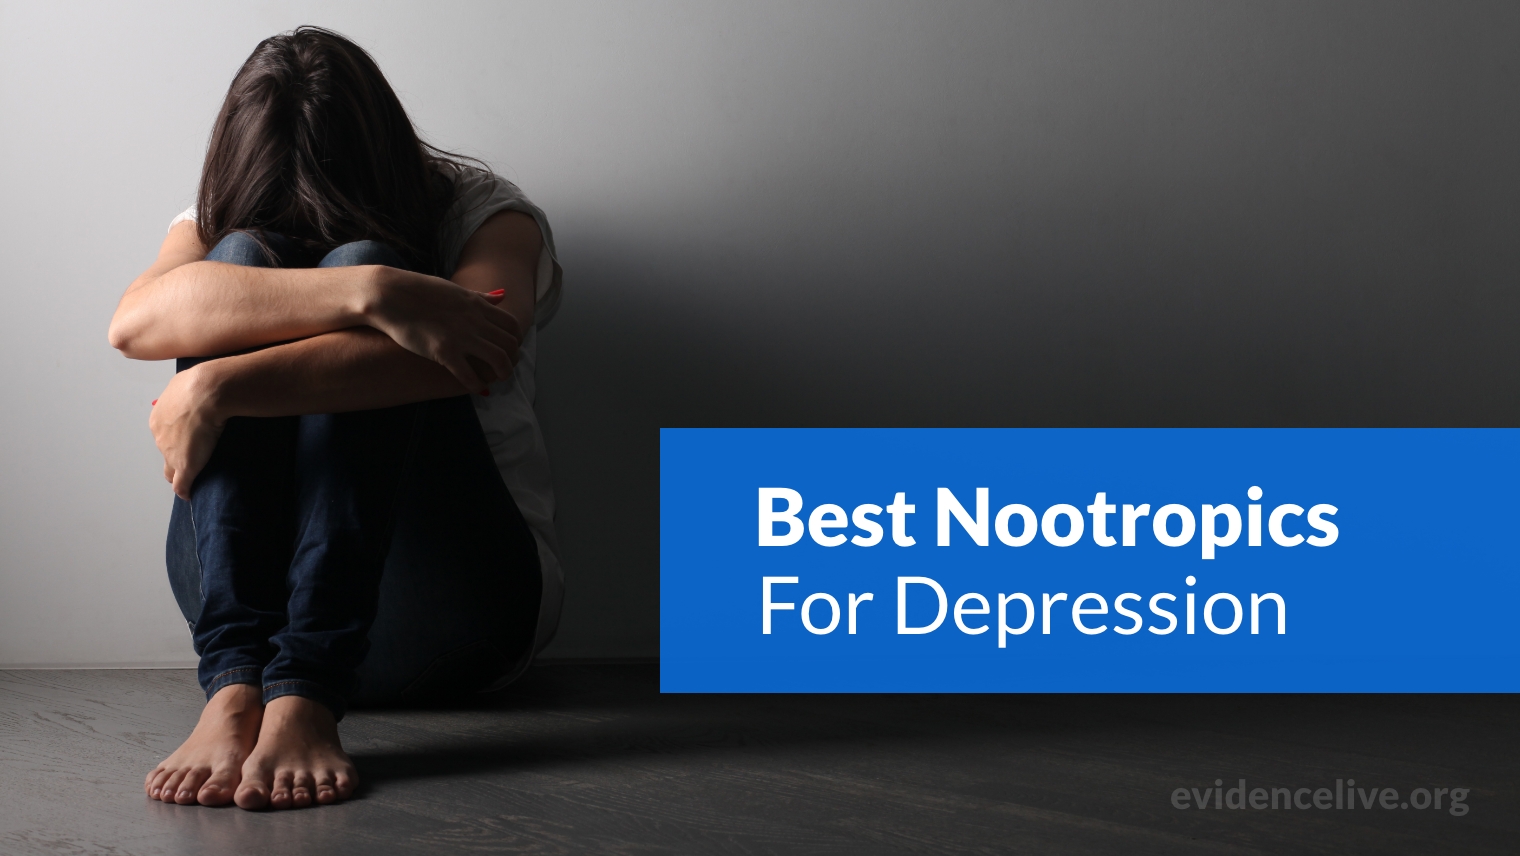 Best Nootropics For Depression, Mood, and Relaxation